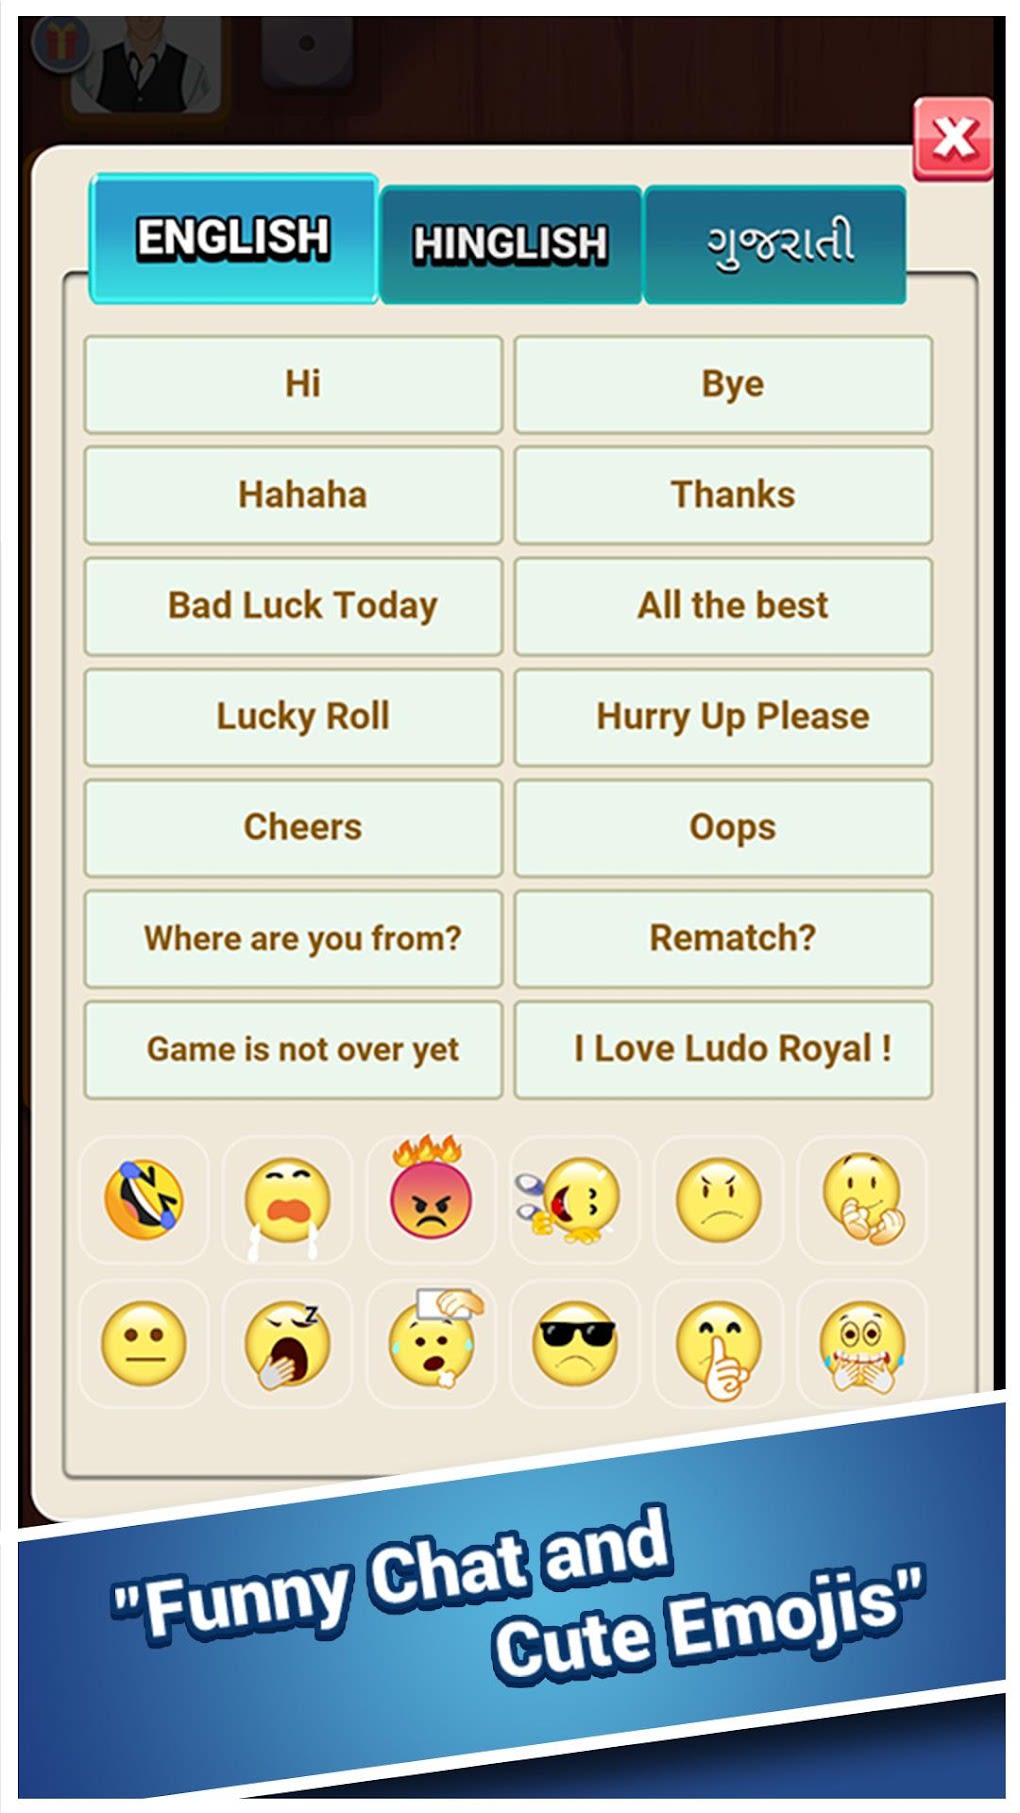 Stream Ludo Royal - Online King: The Best Game to Practice Your